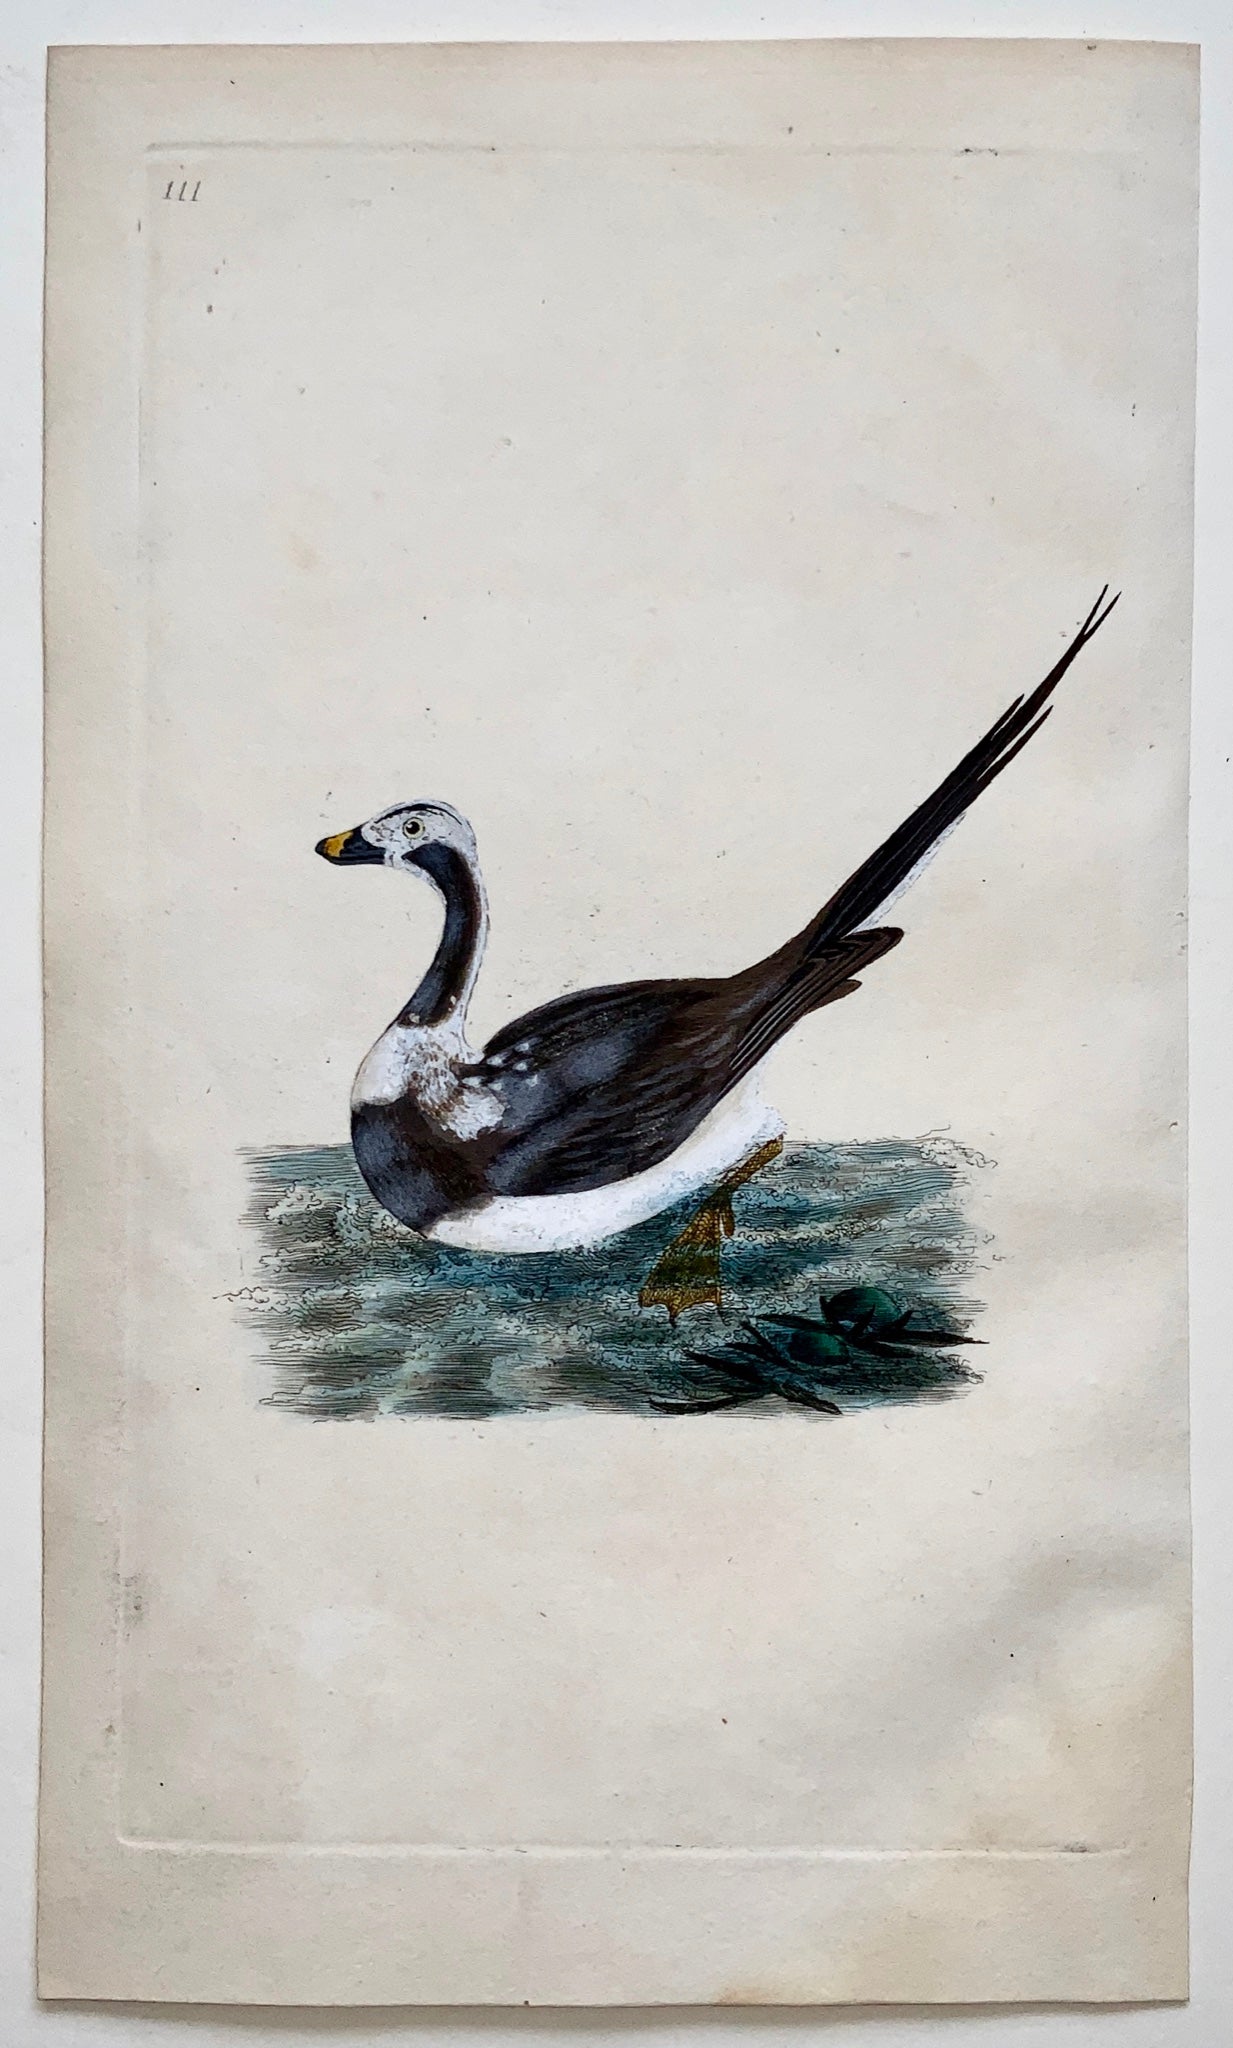 1794 Edward Donovan - LONG TAILED DUCK Ornithology - exquisite hand coloured copper engraving